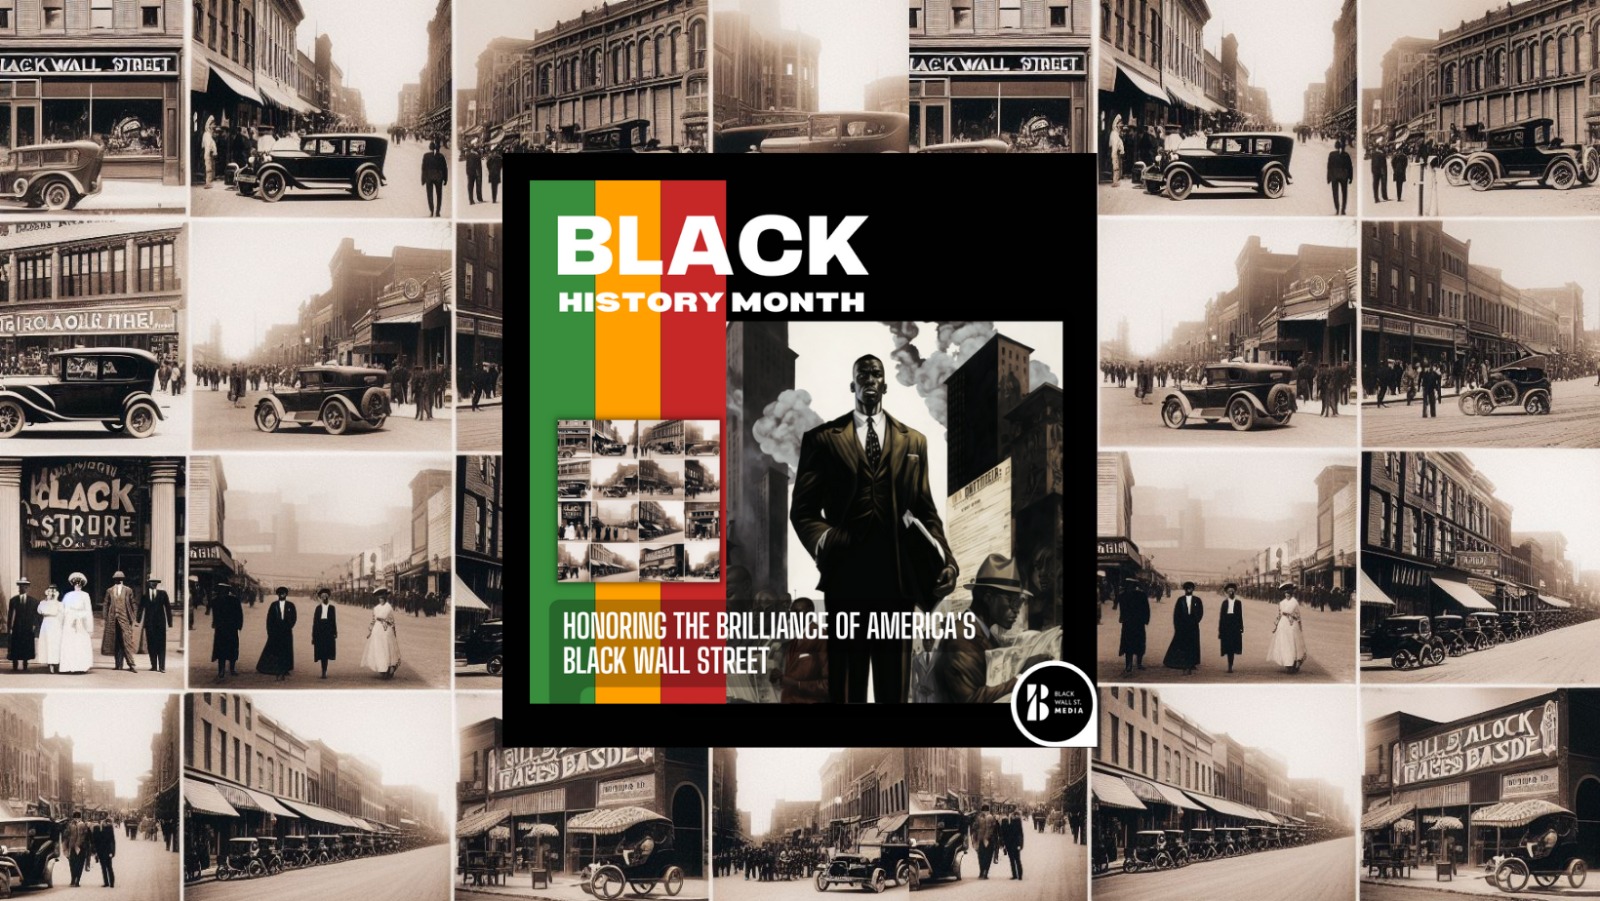 Honoring the Brilliance of America’s Black Wall Street